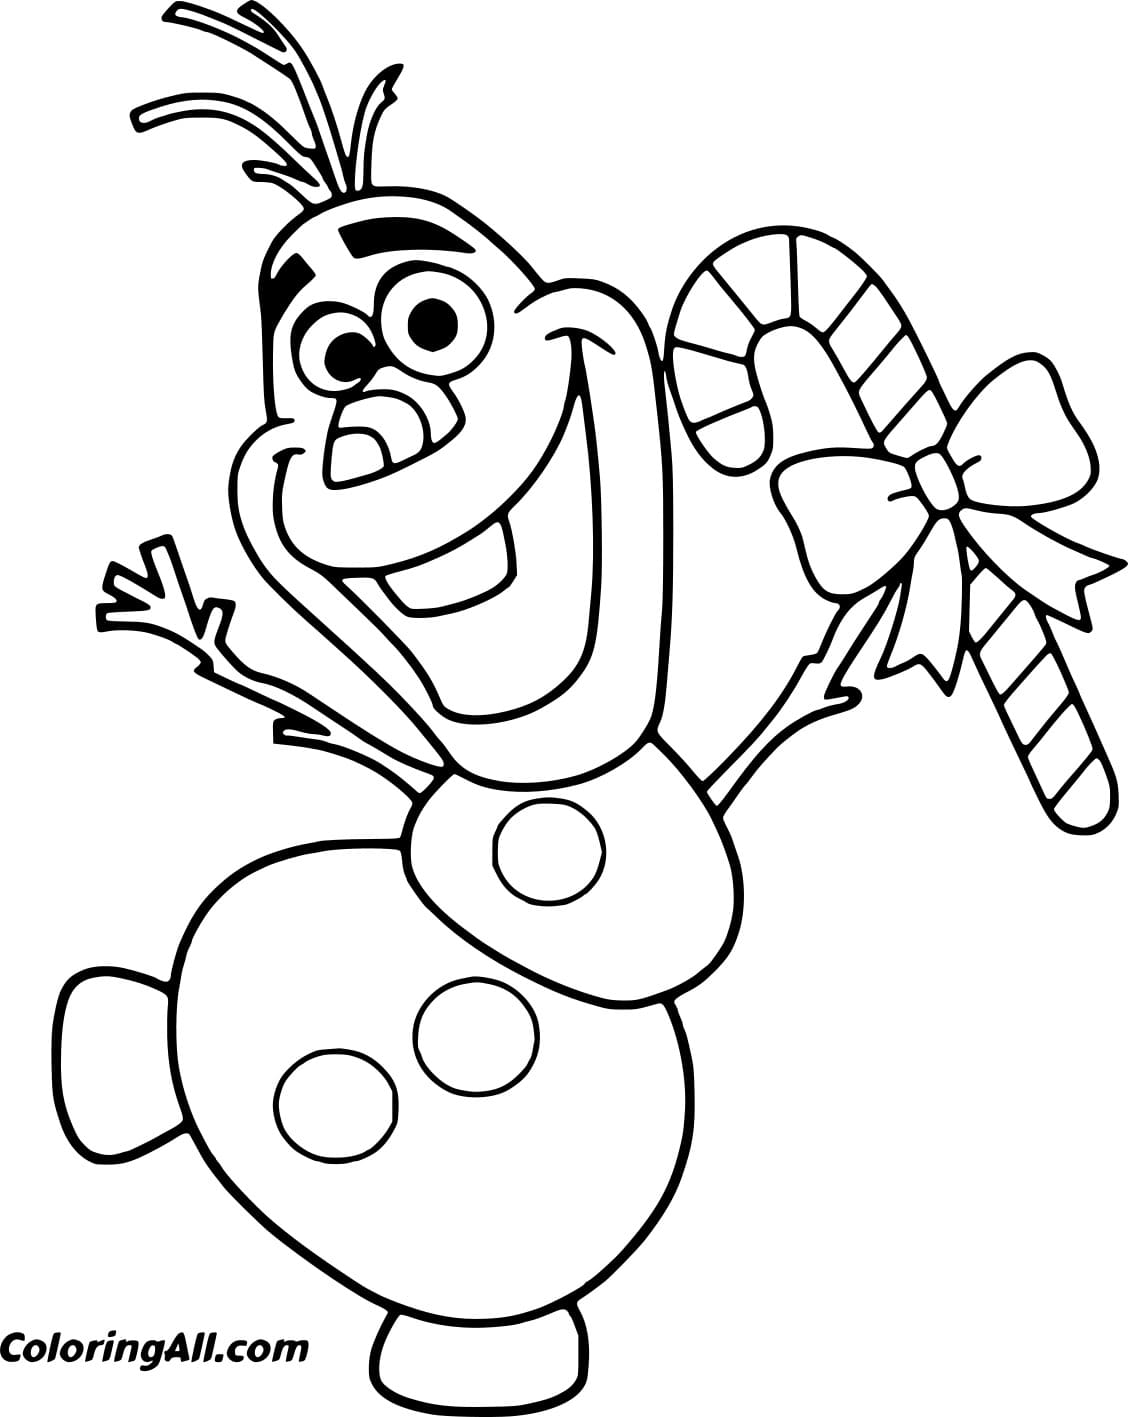 Olaf Holds A Candy Cane